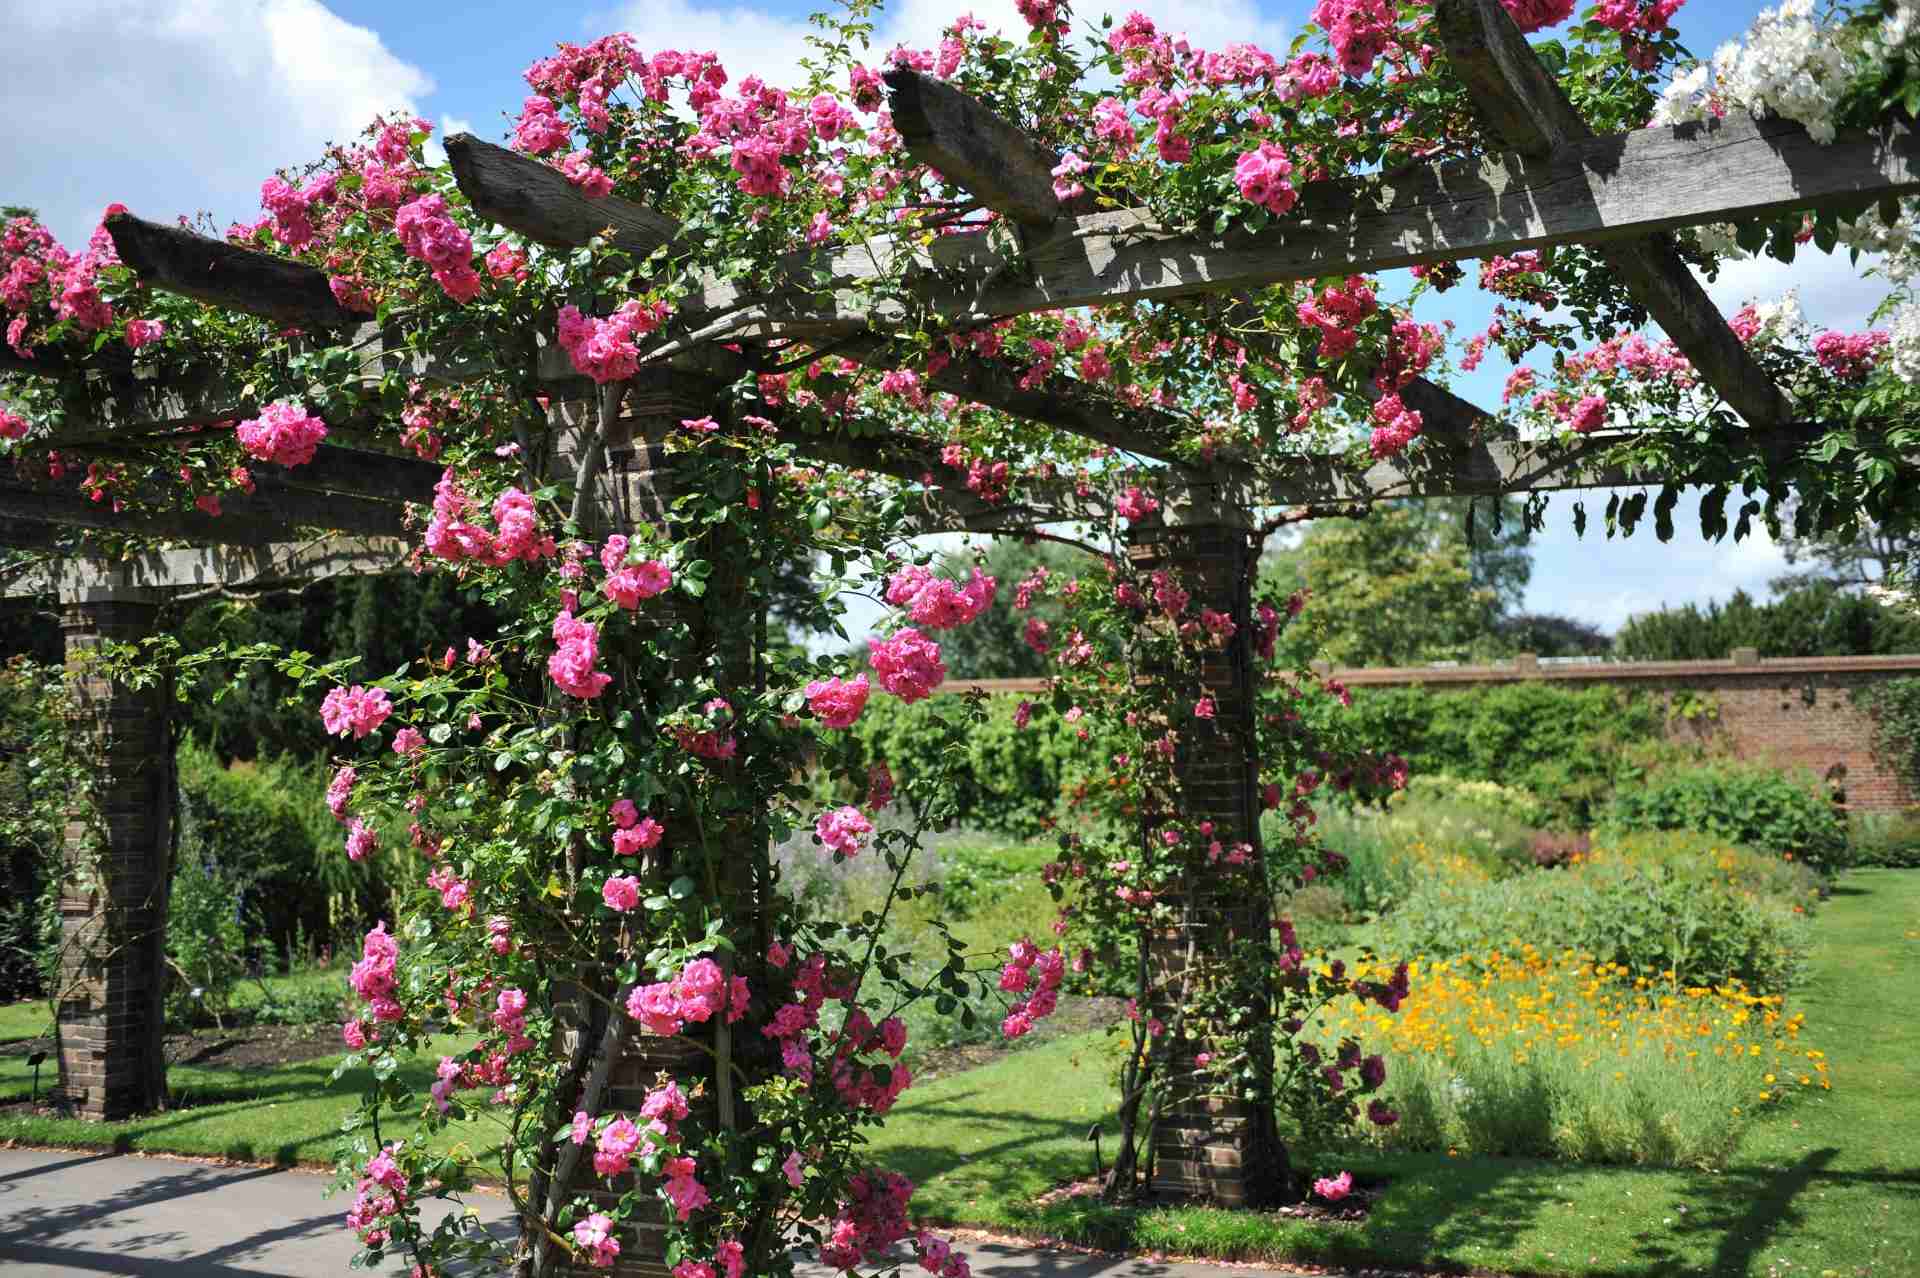 A pergola with flowers